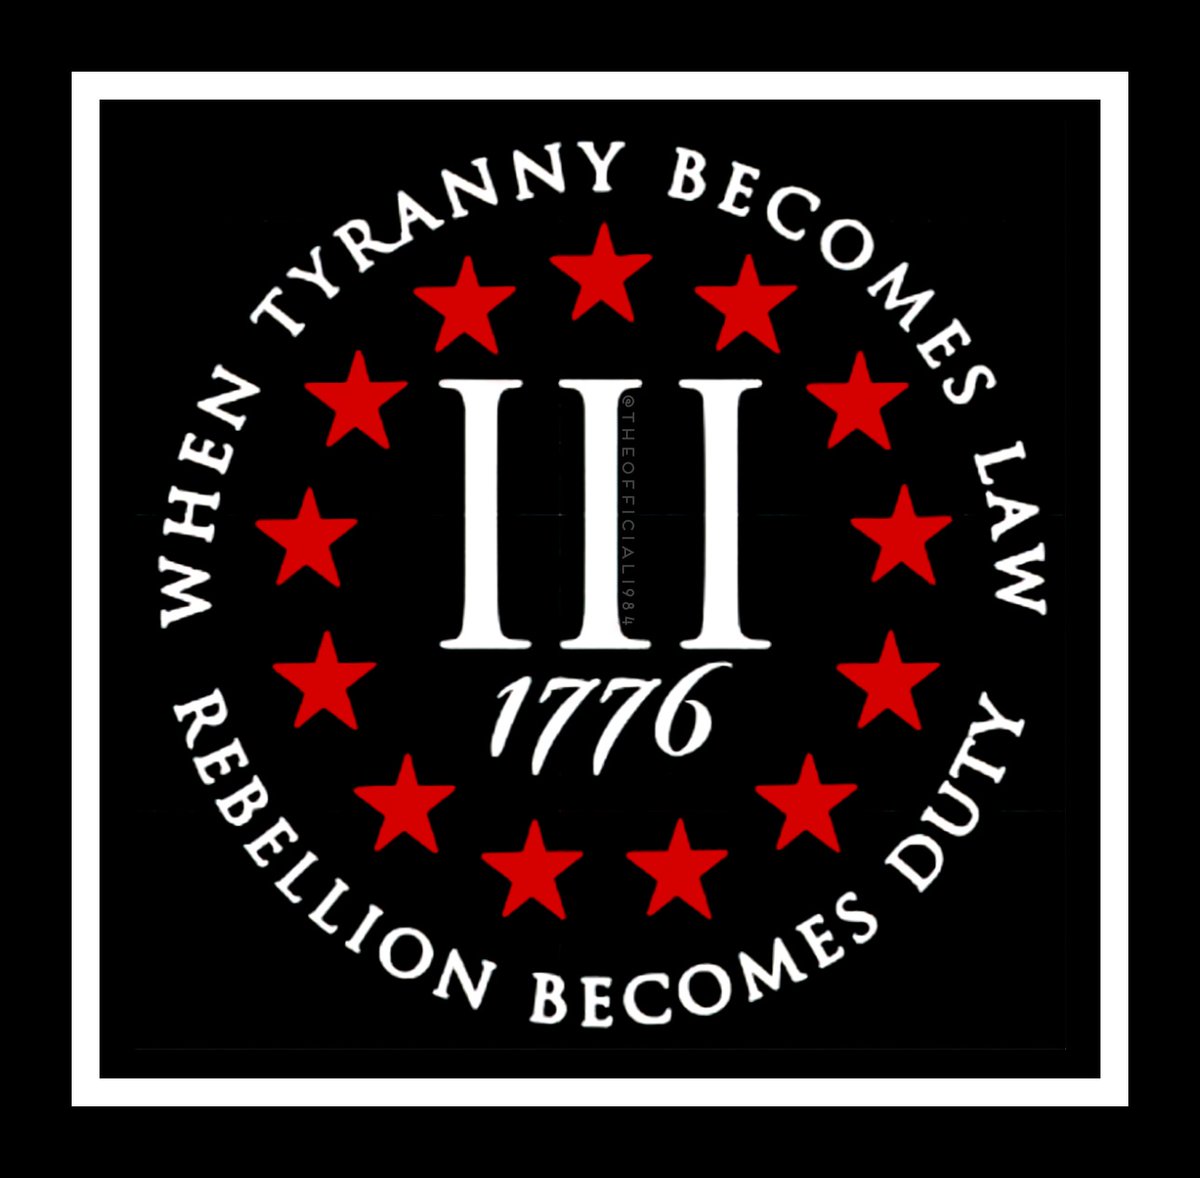 You are watching tyranny become law before your very eyes. It's time to RISE UP.